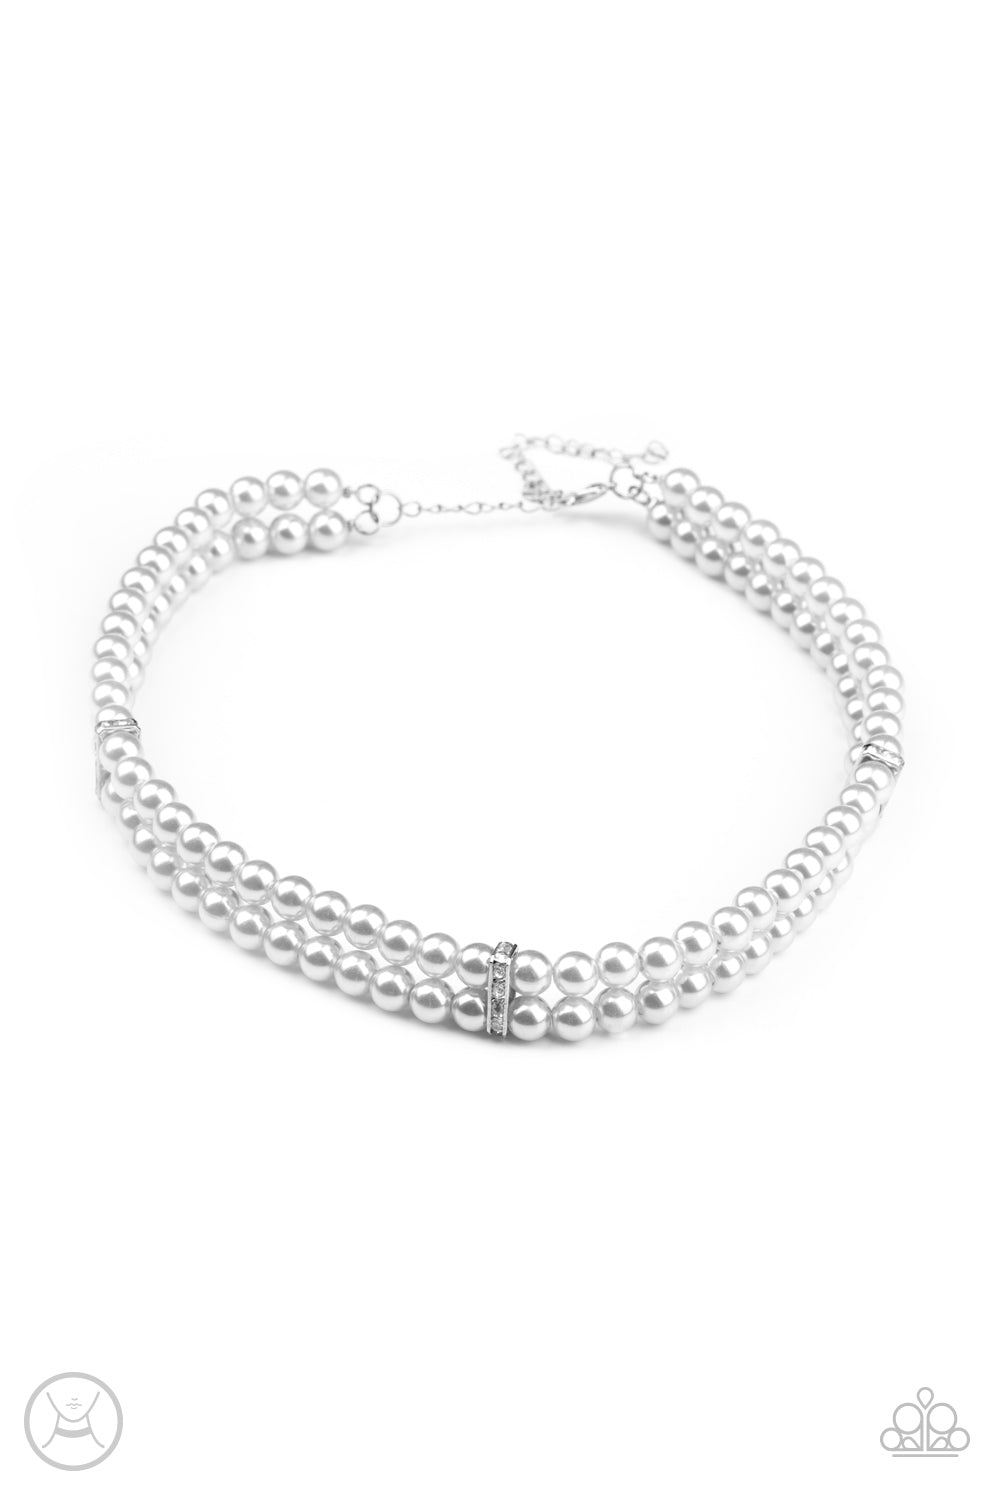 Put On Your Party Dress - Silver Choker